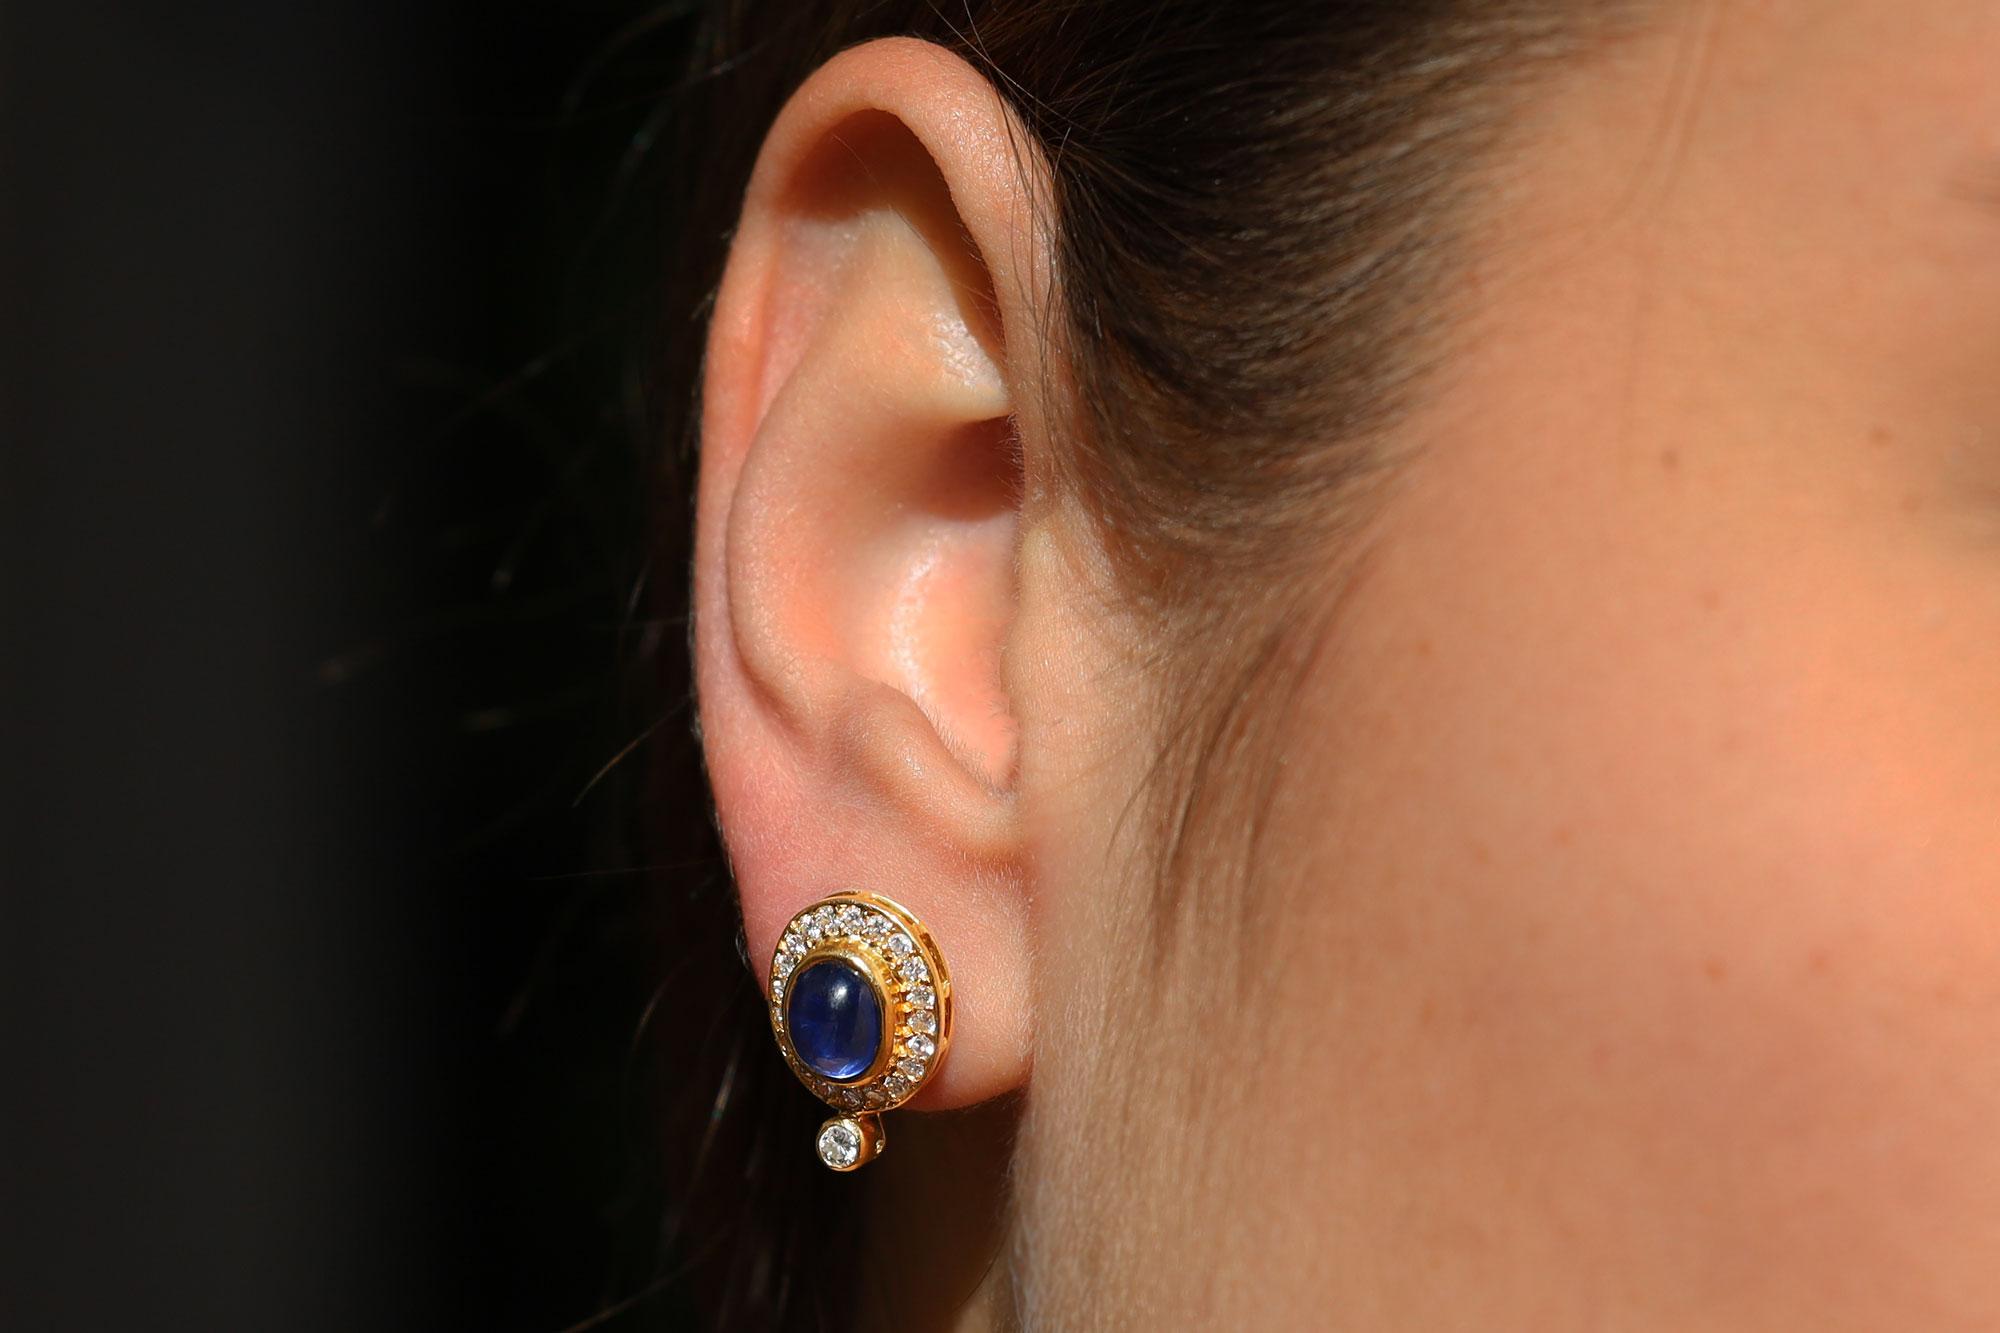 Vintage 3 Carat Cabochon Sapphire and Diamond Earrings In Good Condition For Sale In Santa Barbara, CA